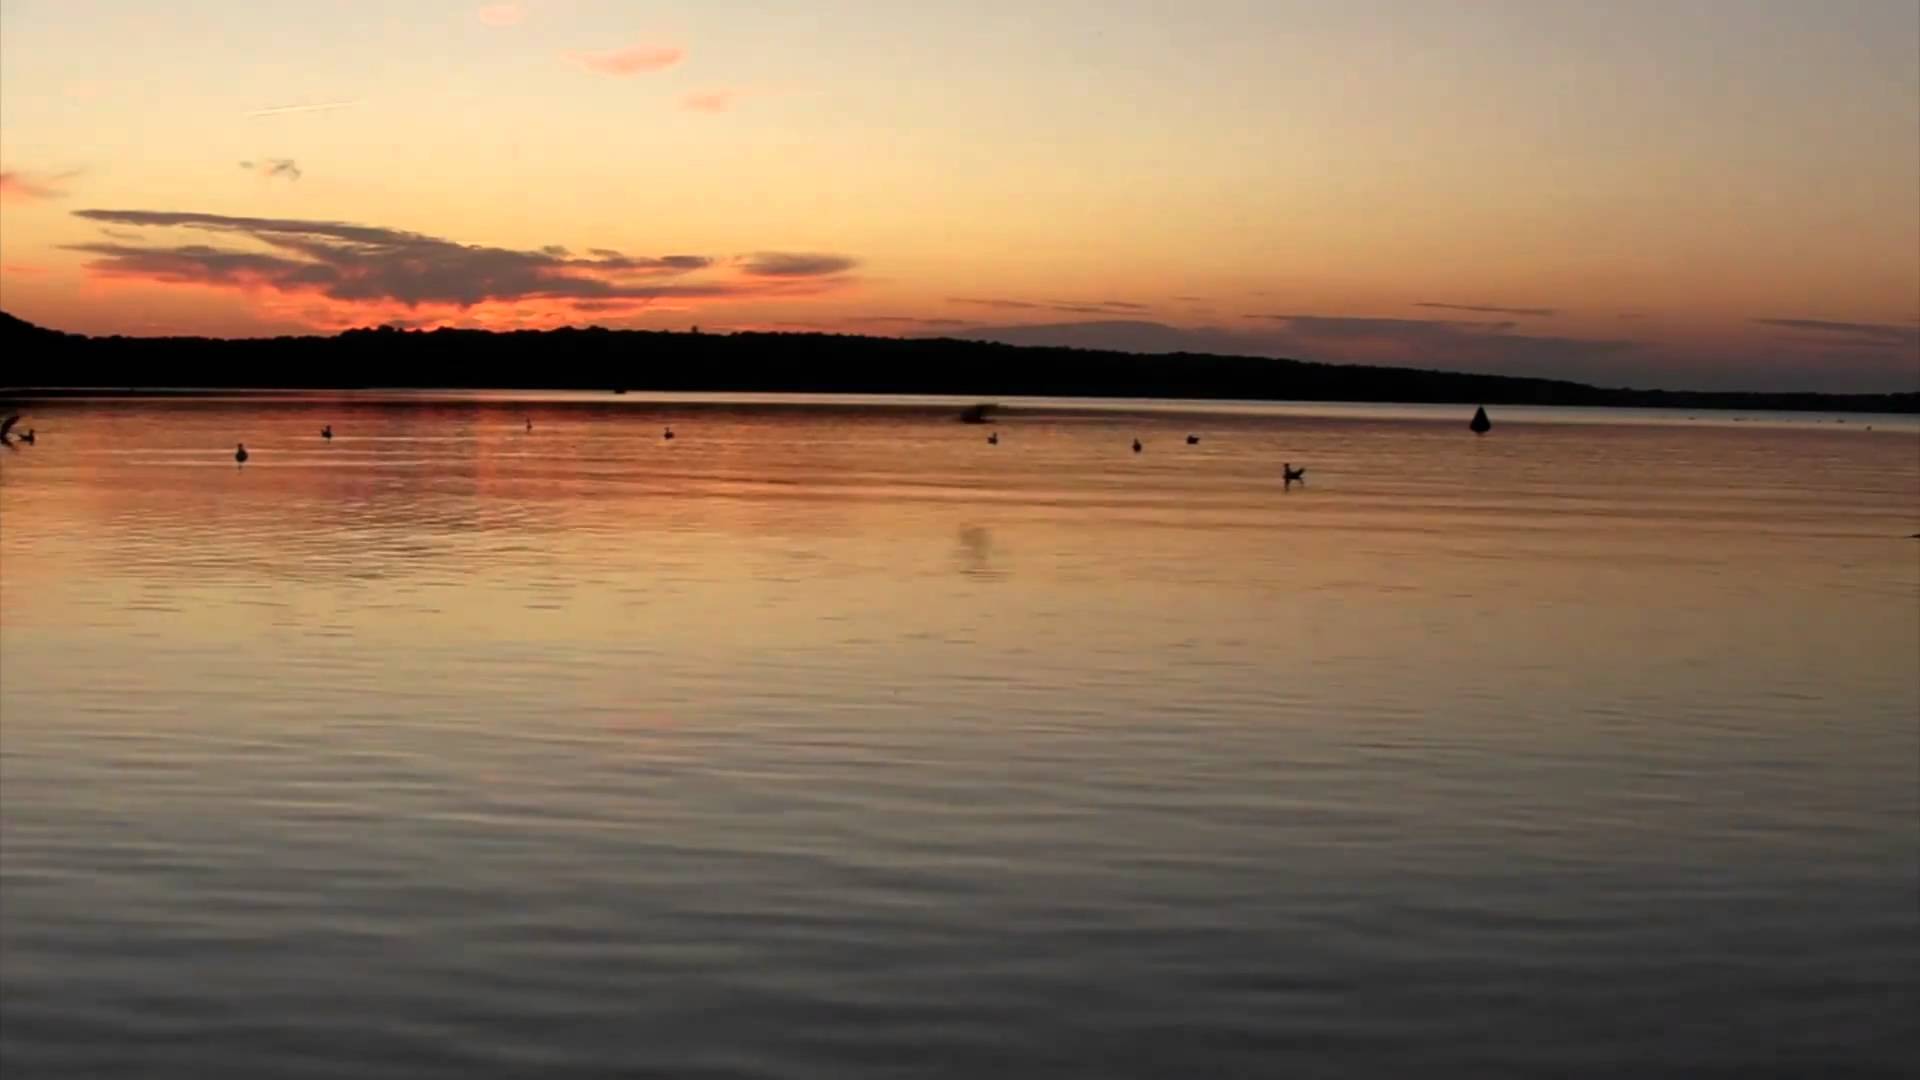 Relaxing Ducks on a calm Lake at Dusk - YouTube